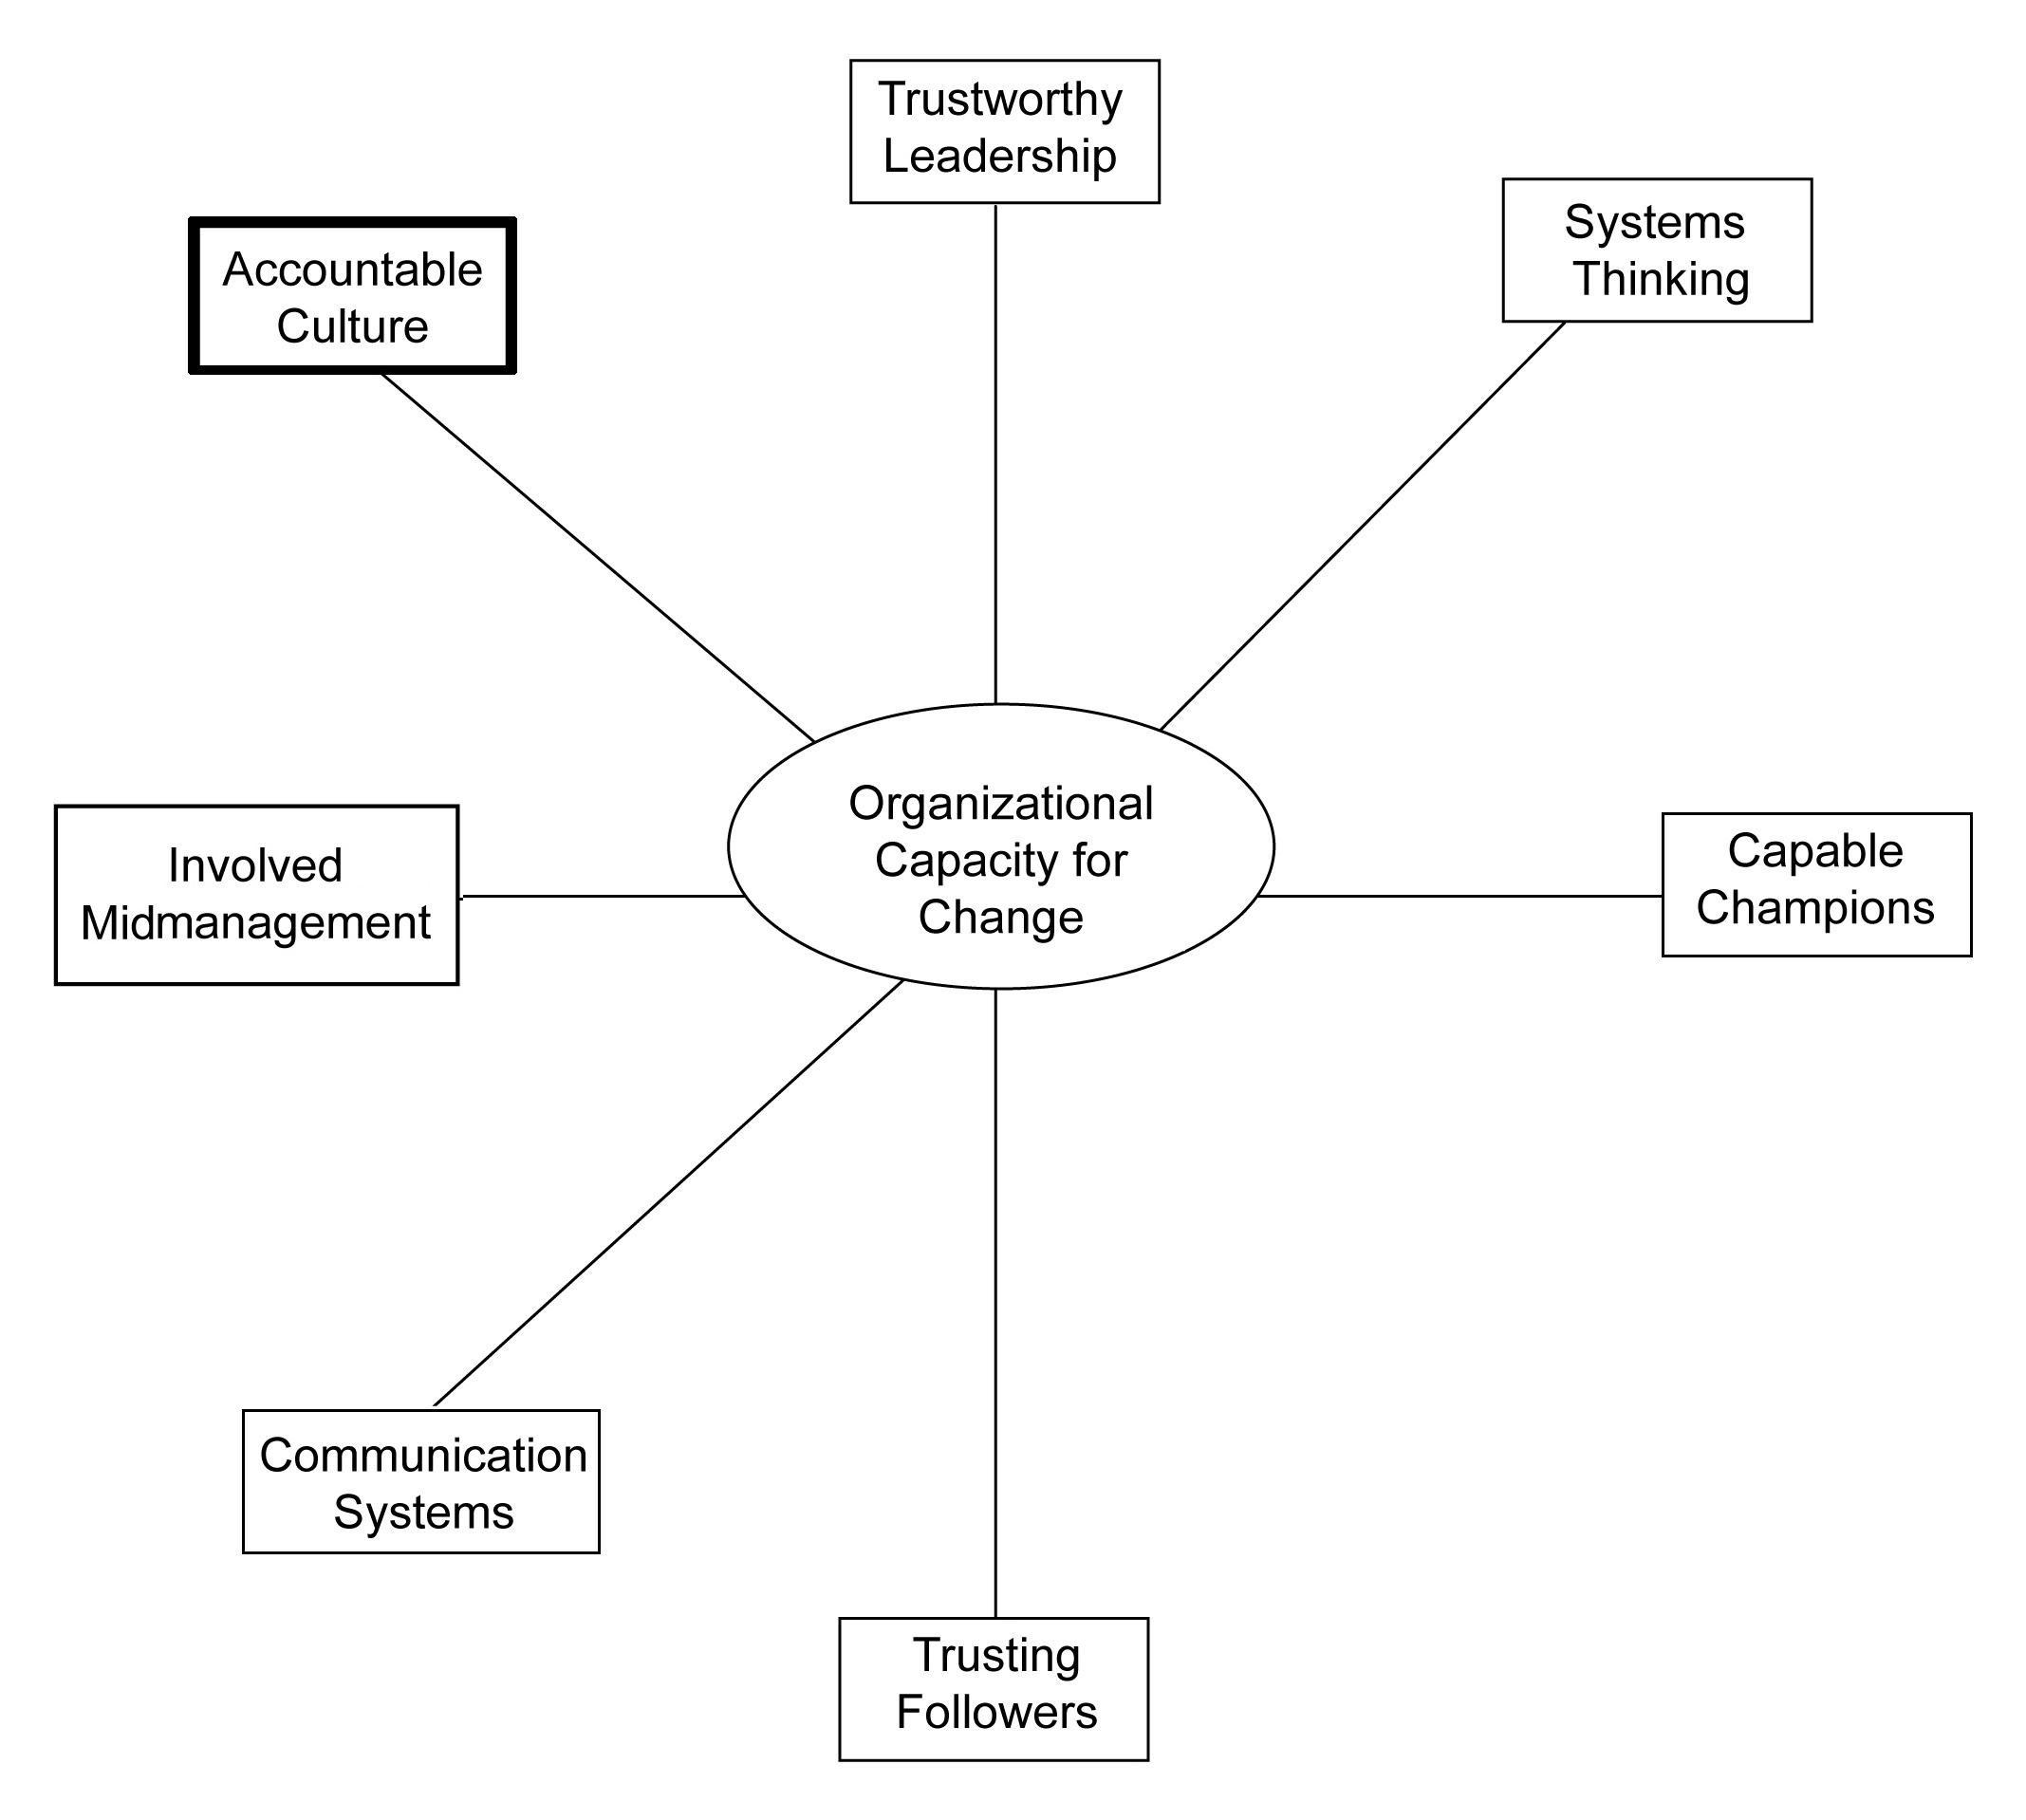 The seven dimensions of capacity for organizational change: trusting followers, communications systems, involved middle management, accountable culture, trustworthy leadership and capable champions